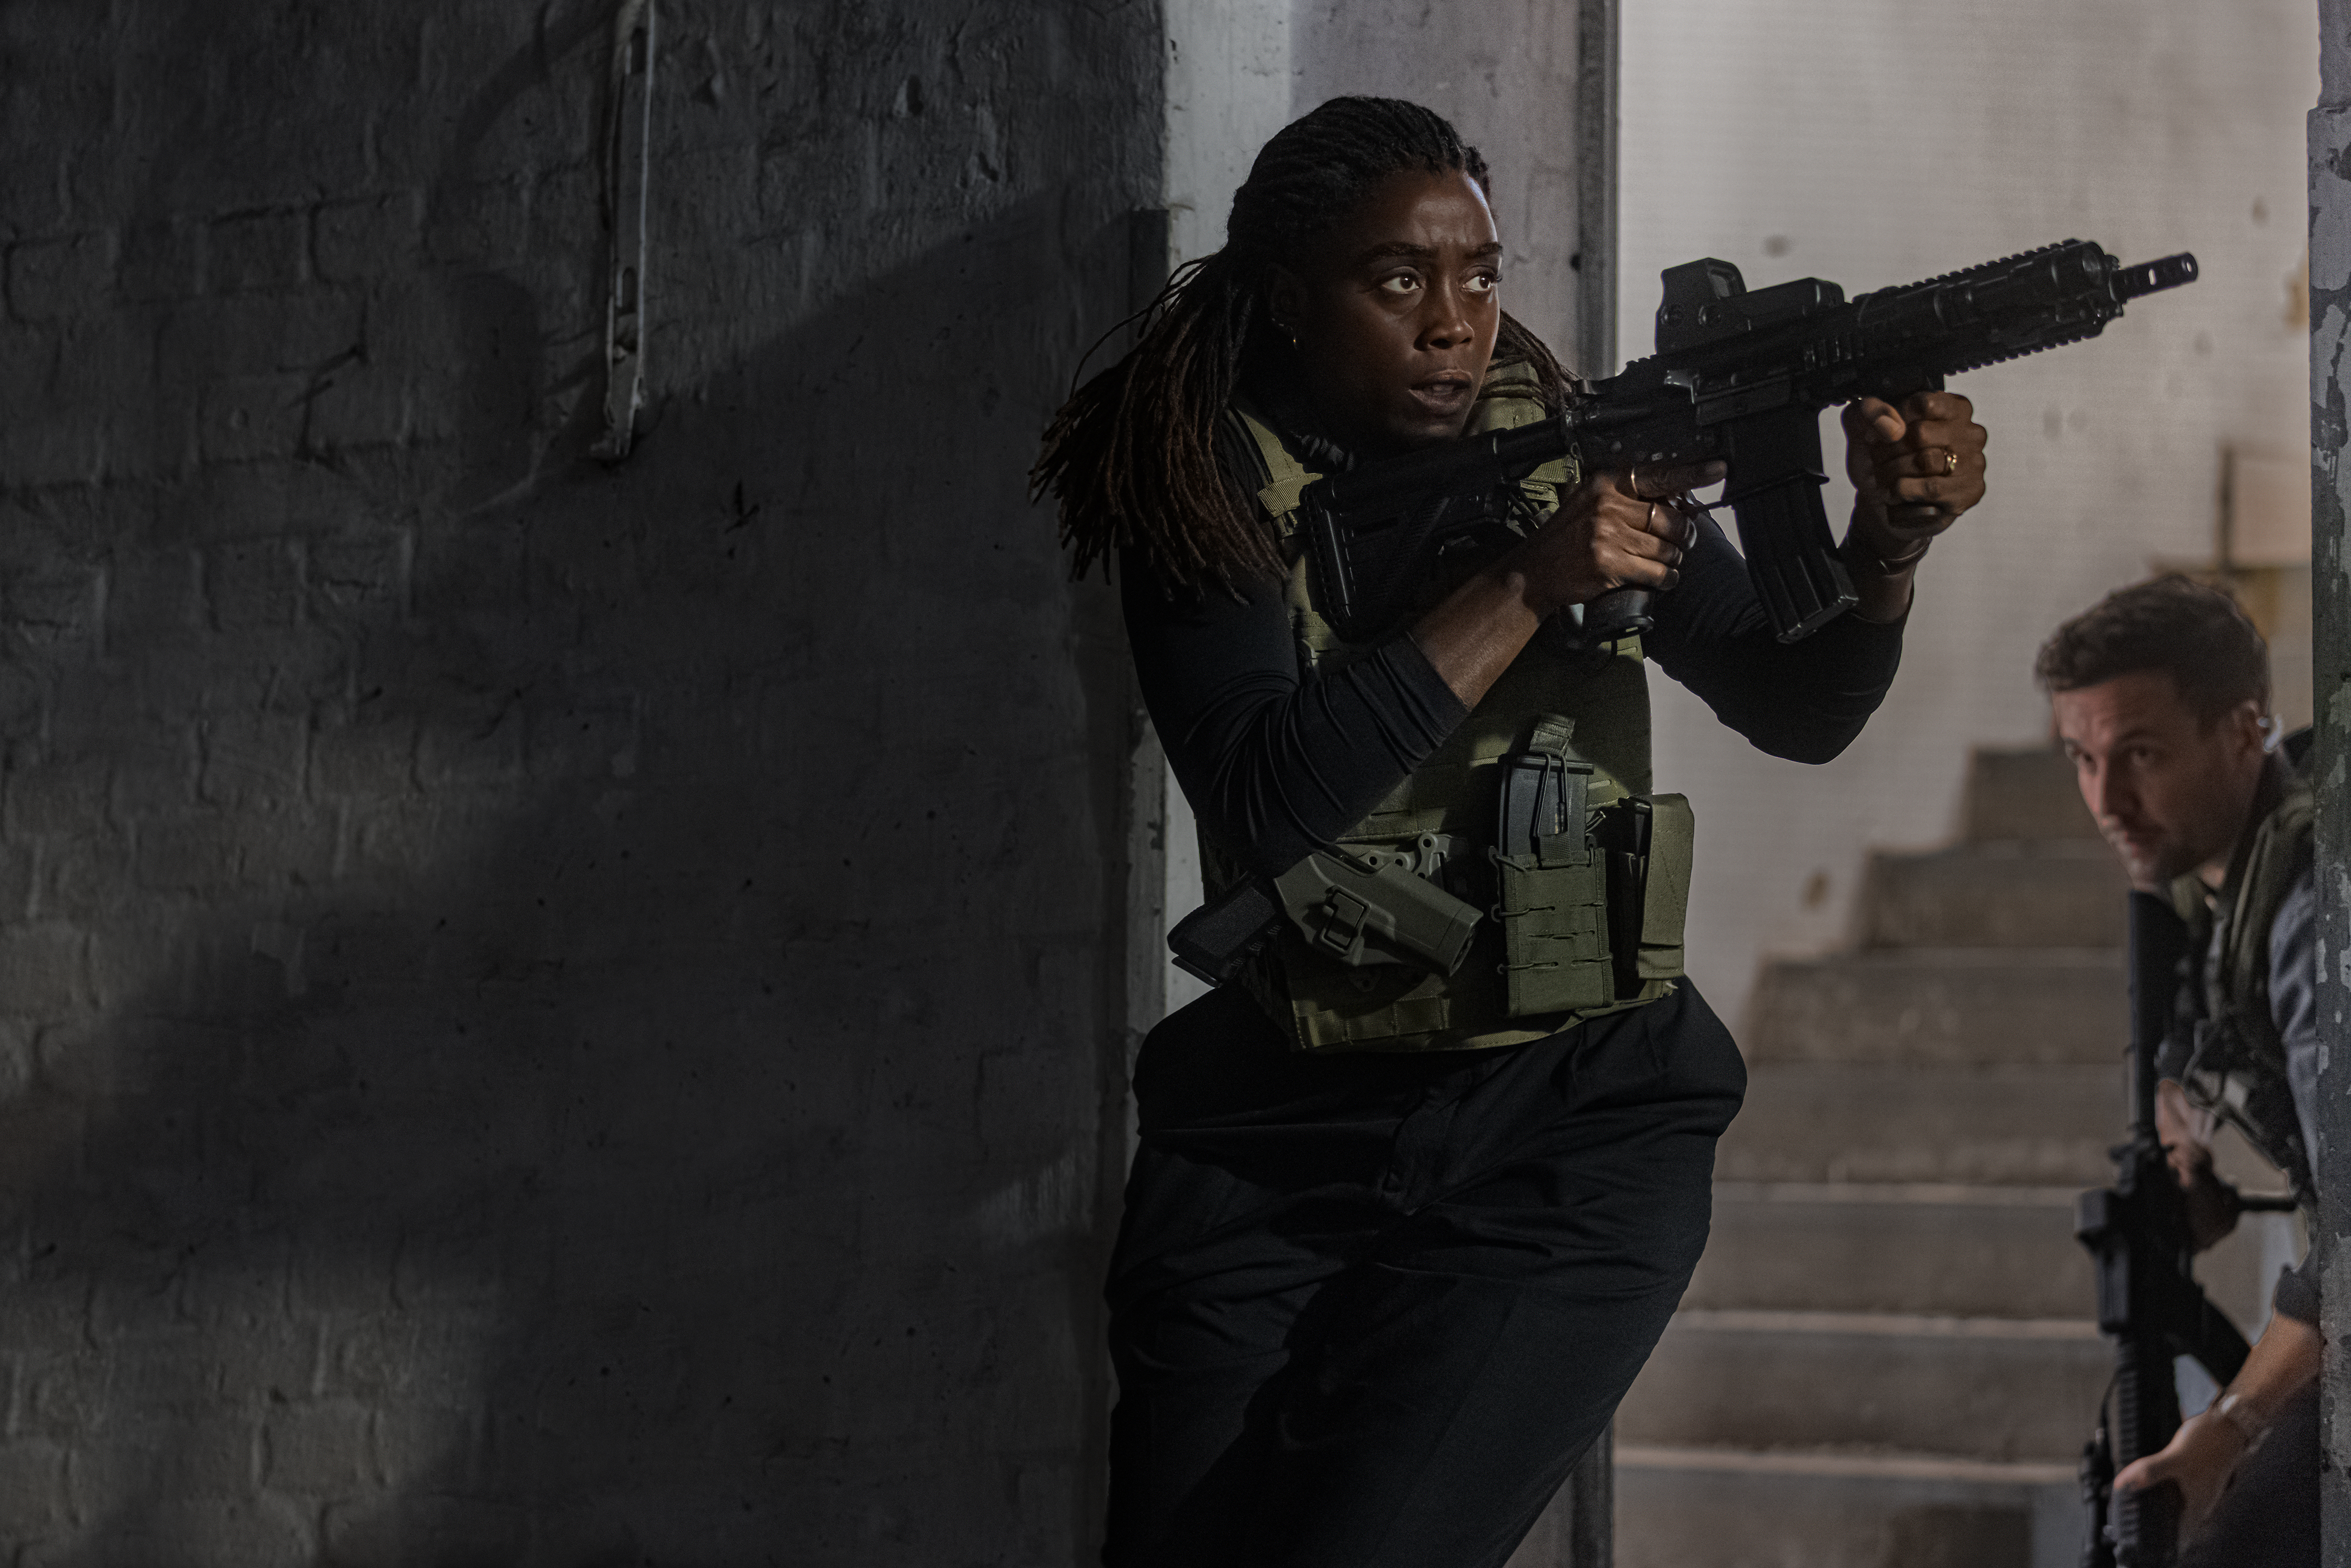 Lashana Lynch in character, with military vest and gun